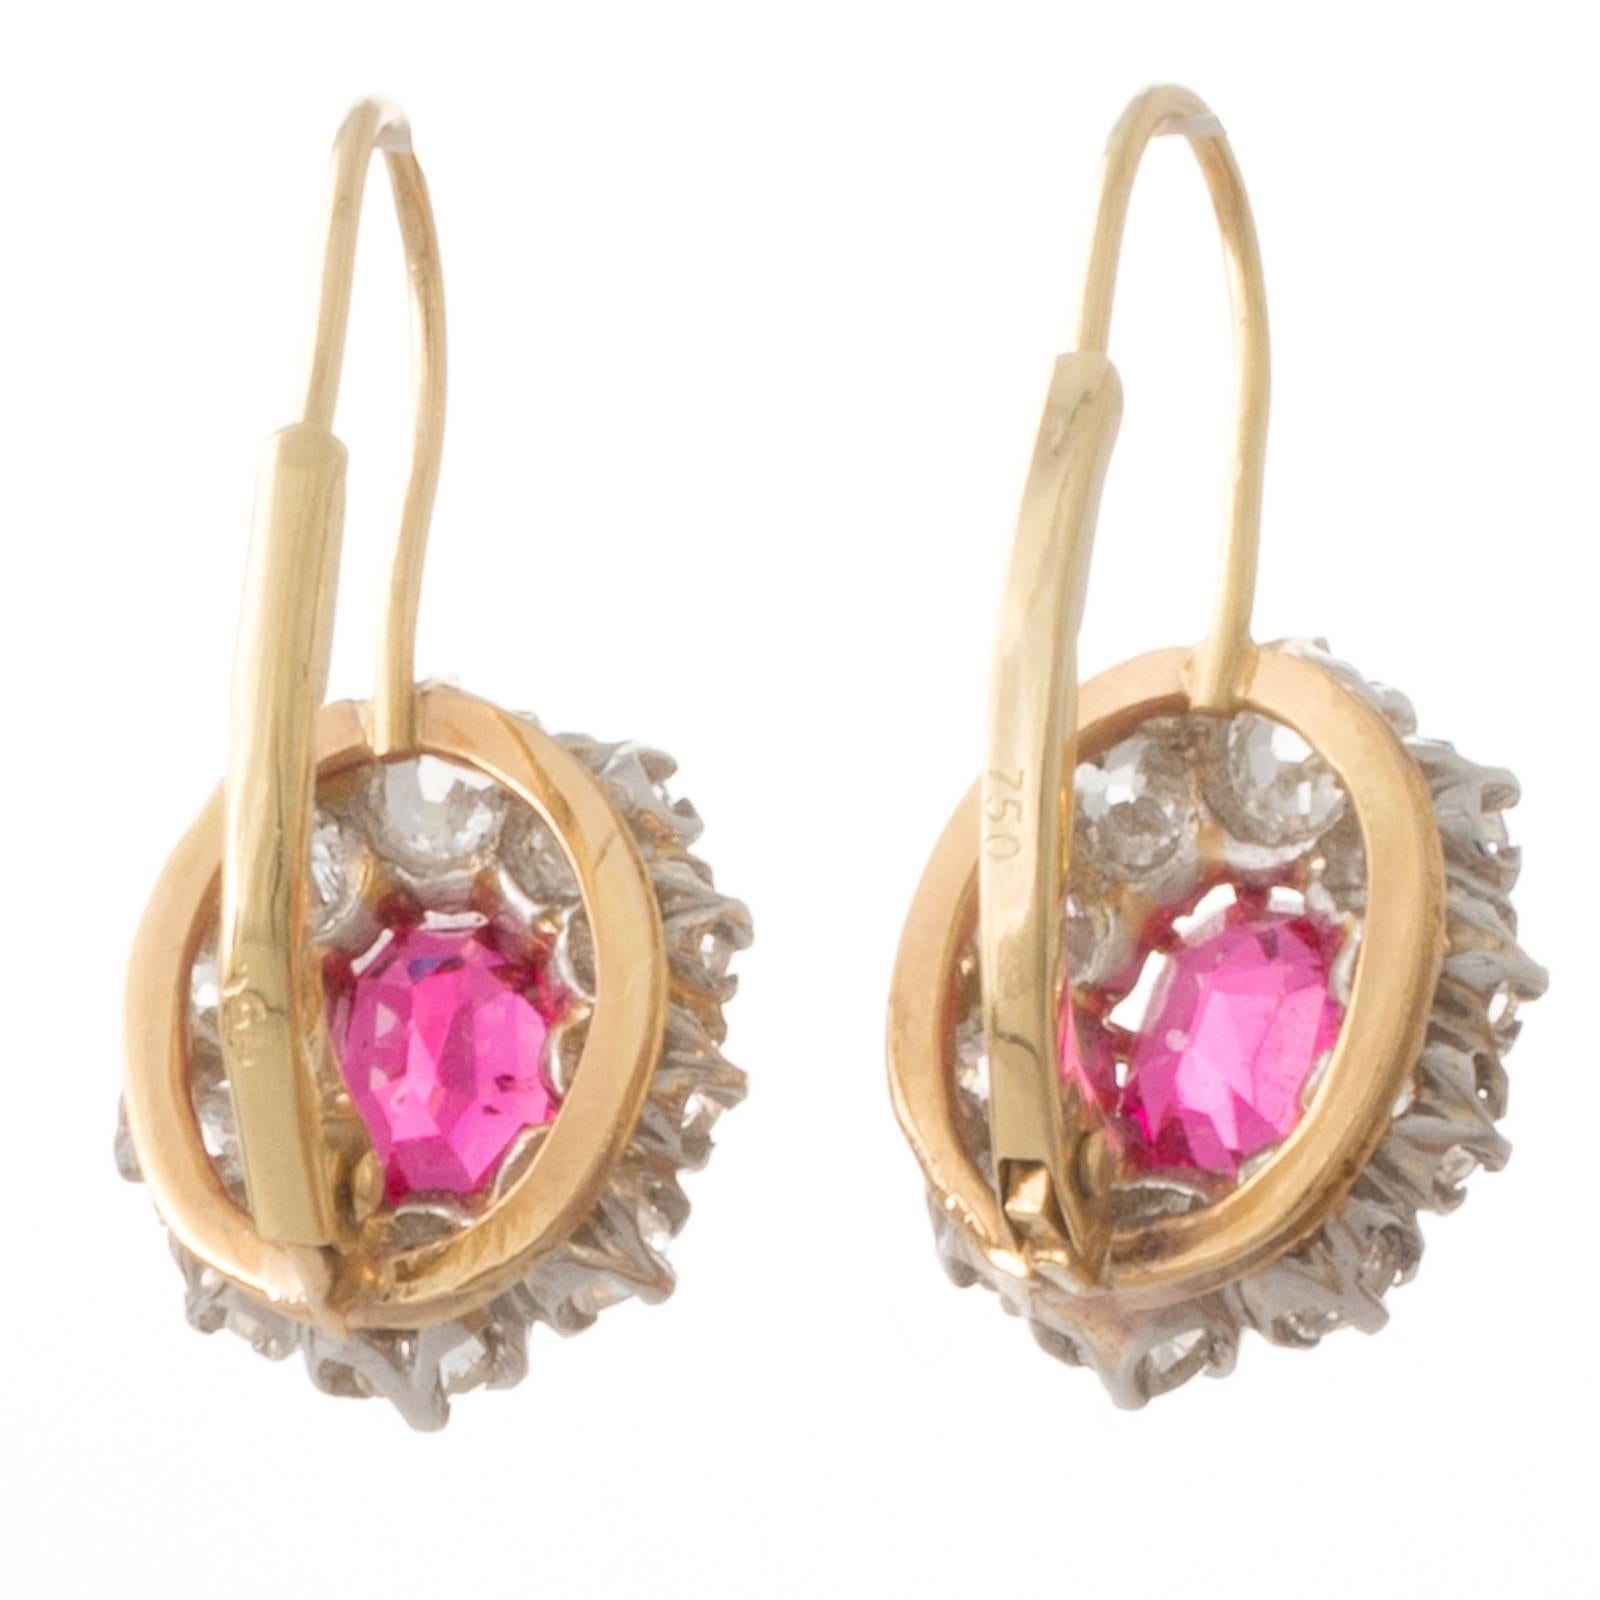 A pair of platinum and 18ct yellow gold antique cluster earrings featuring a pair of natural oval faceted spinel of bright pink-red colour of approximate total weight 1.00ct each surrounded by a cluster of old cut diamonds graded as colour J-K